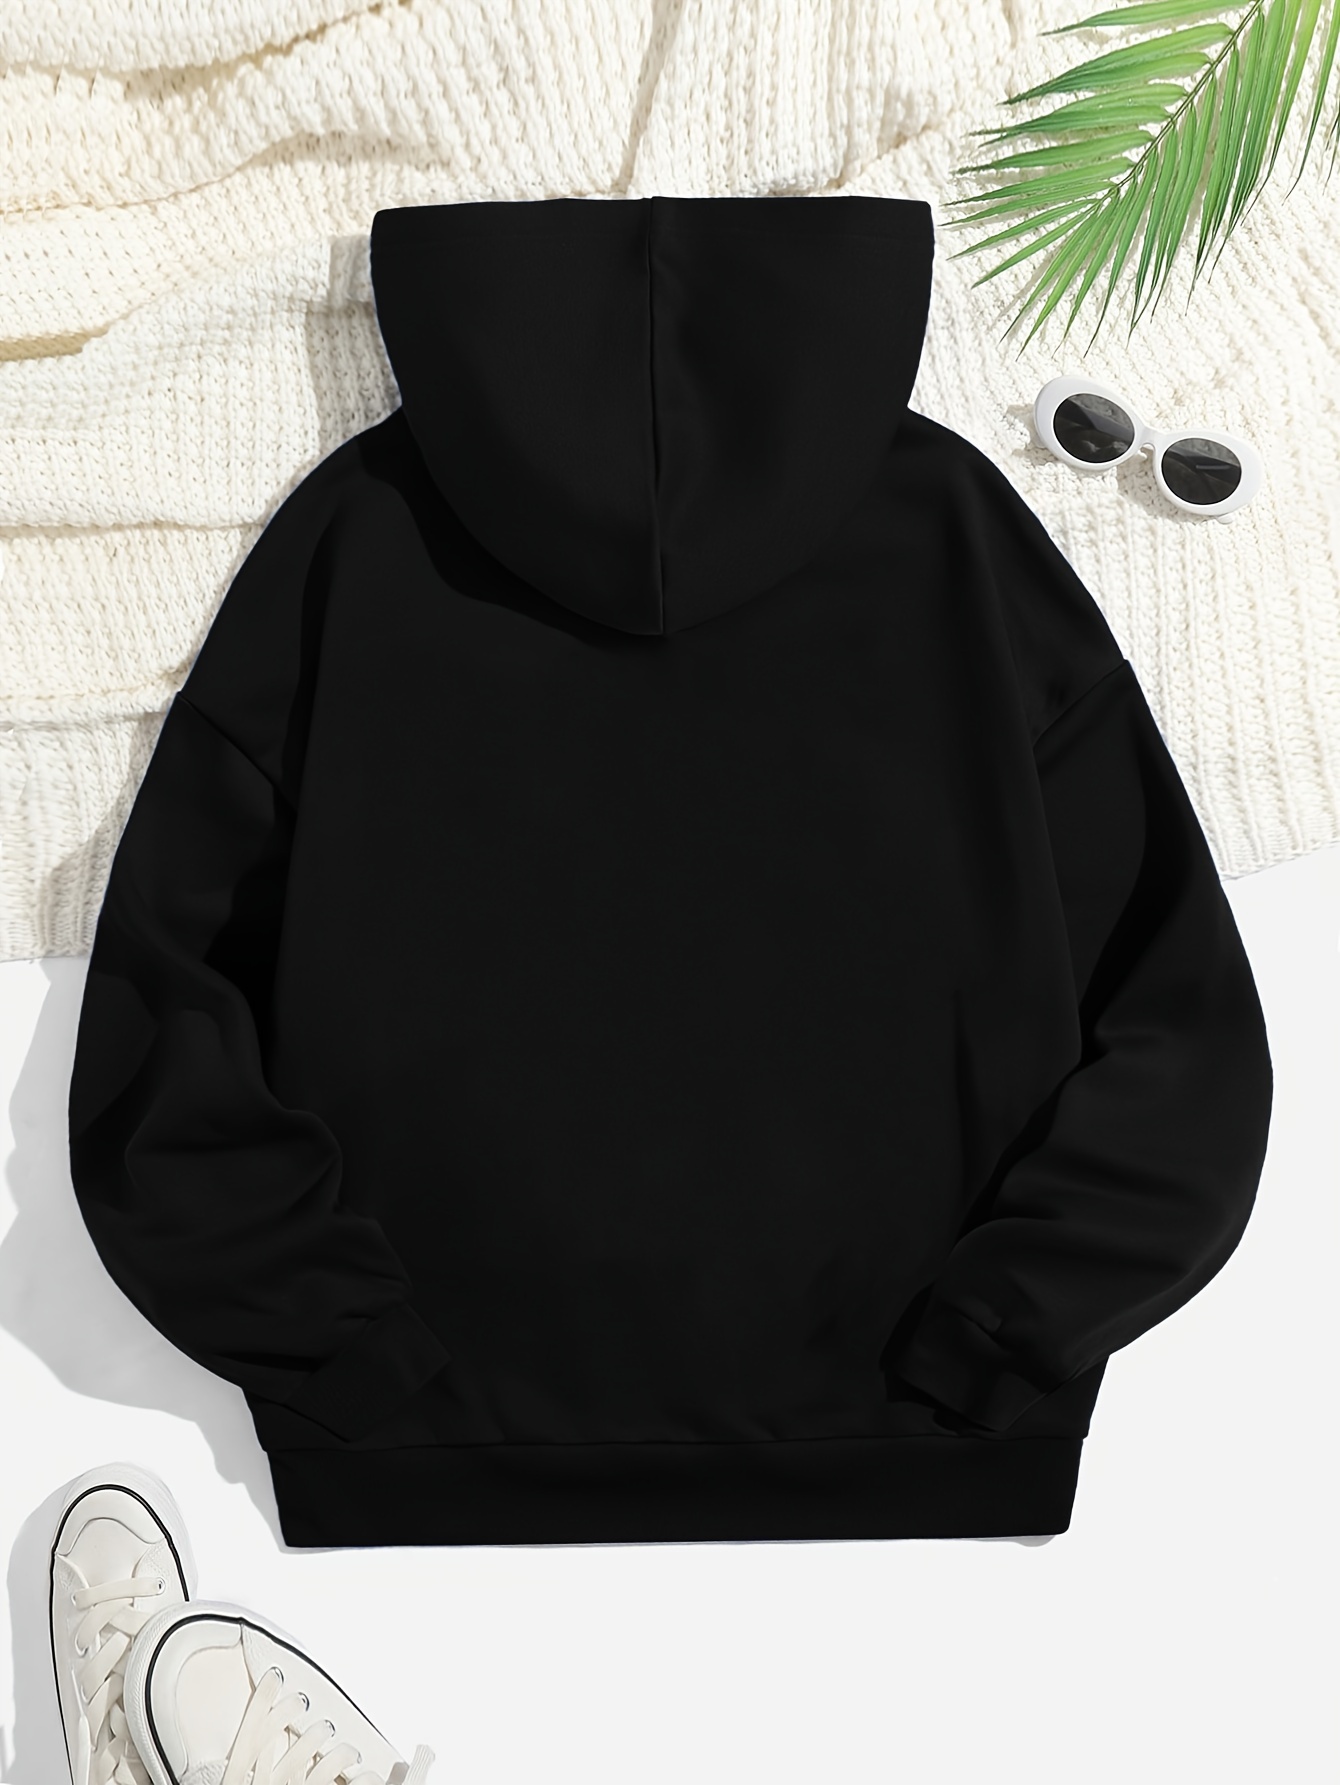 Jacenvly Womens Sweatshirts Graphic Clearance Long Sleeve Plain Hoodies for  Women Casual Fashion Comfort Warmth Plus Size Tops Drawstring Hoodie and  Kangaroo Pocket Pullover 